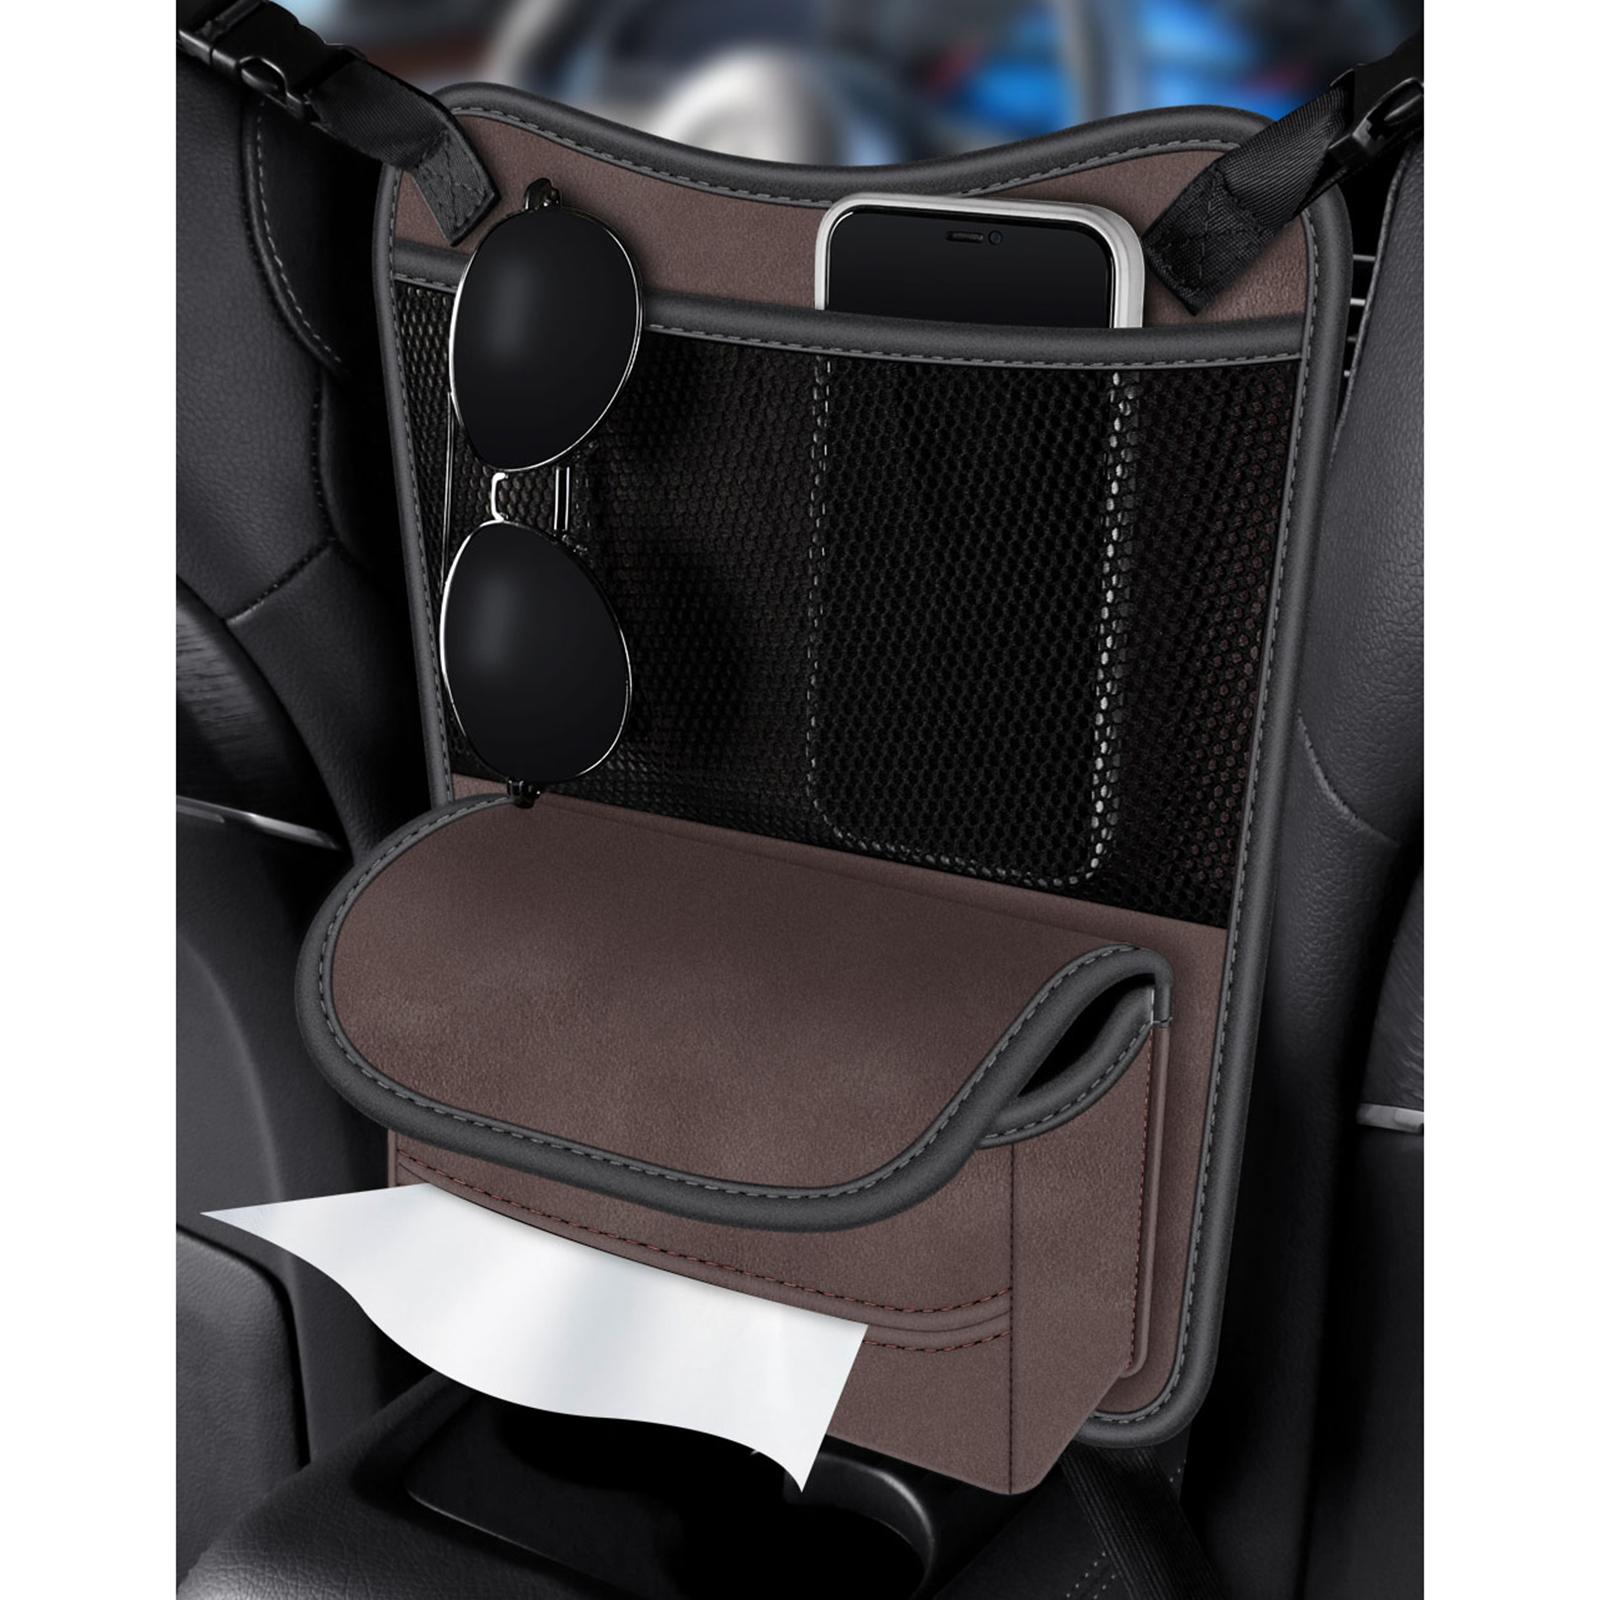 Car Backseat Organizer Tissue Box for Phone Other Items Stowing Tidying Brown